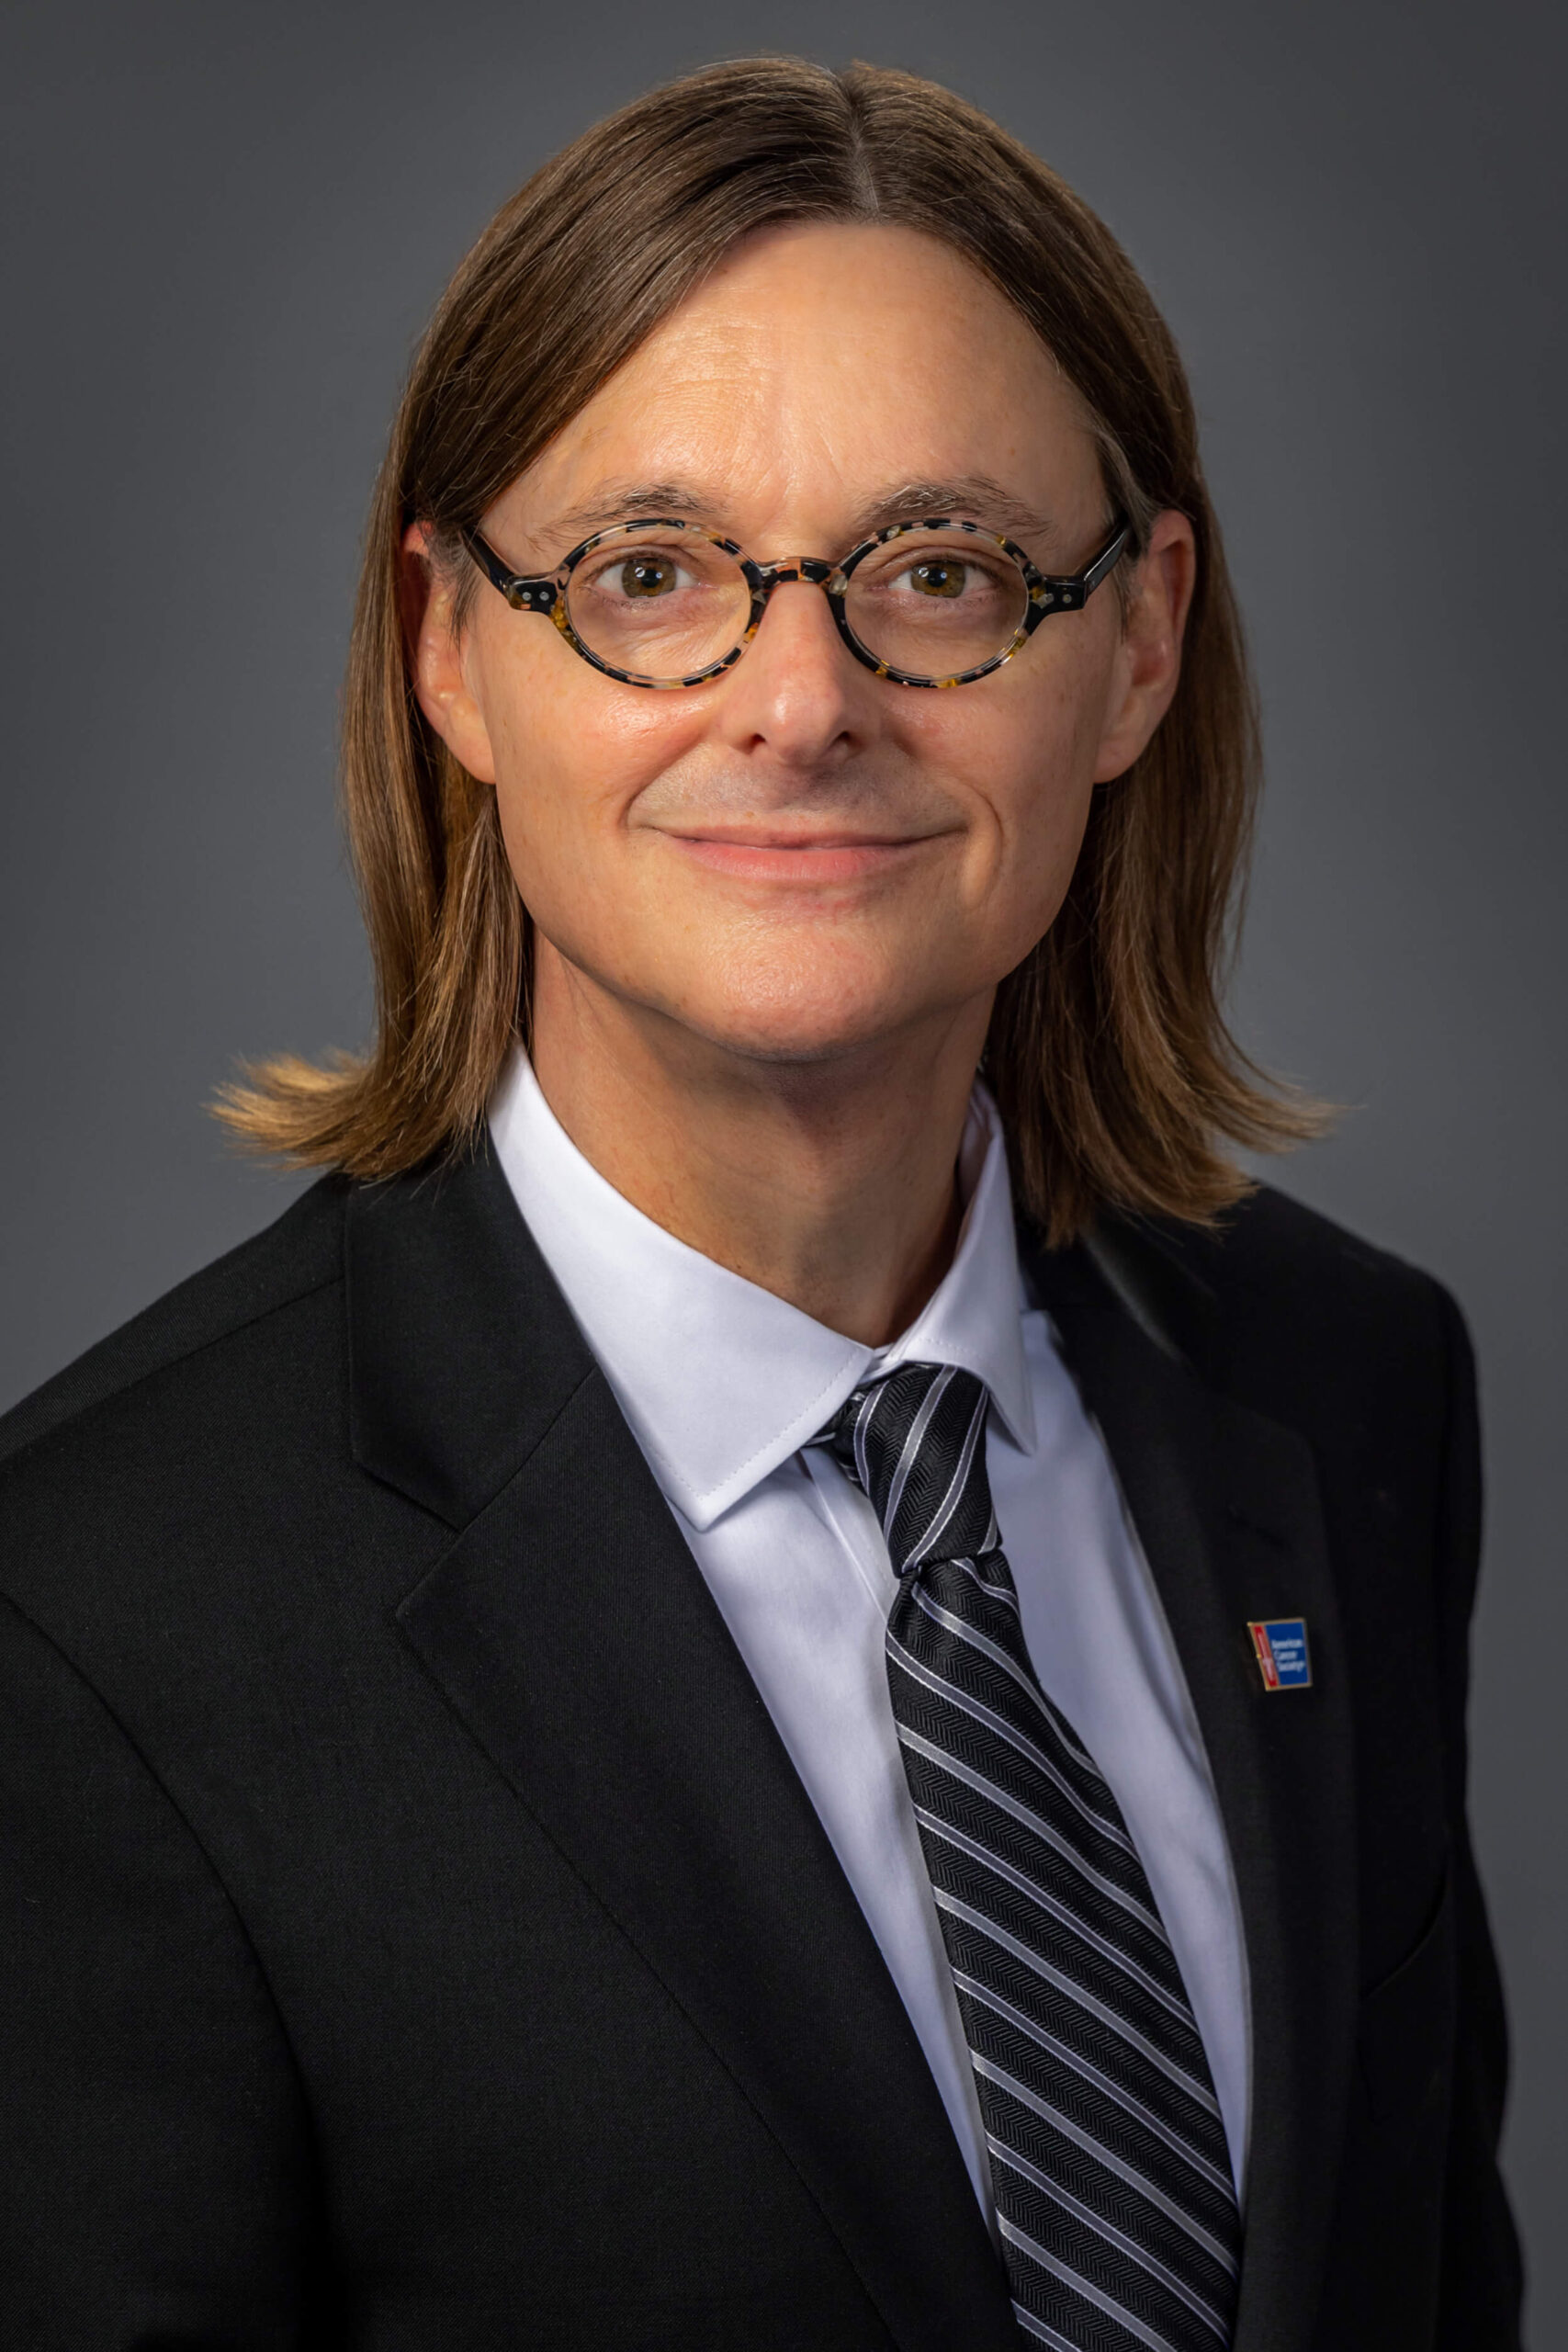 man in tortoise shell glasses and corporate suit and tie